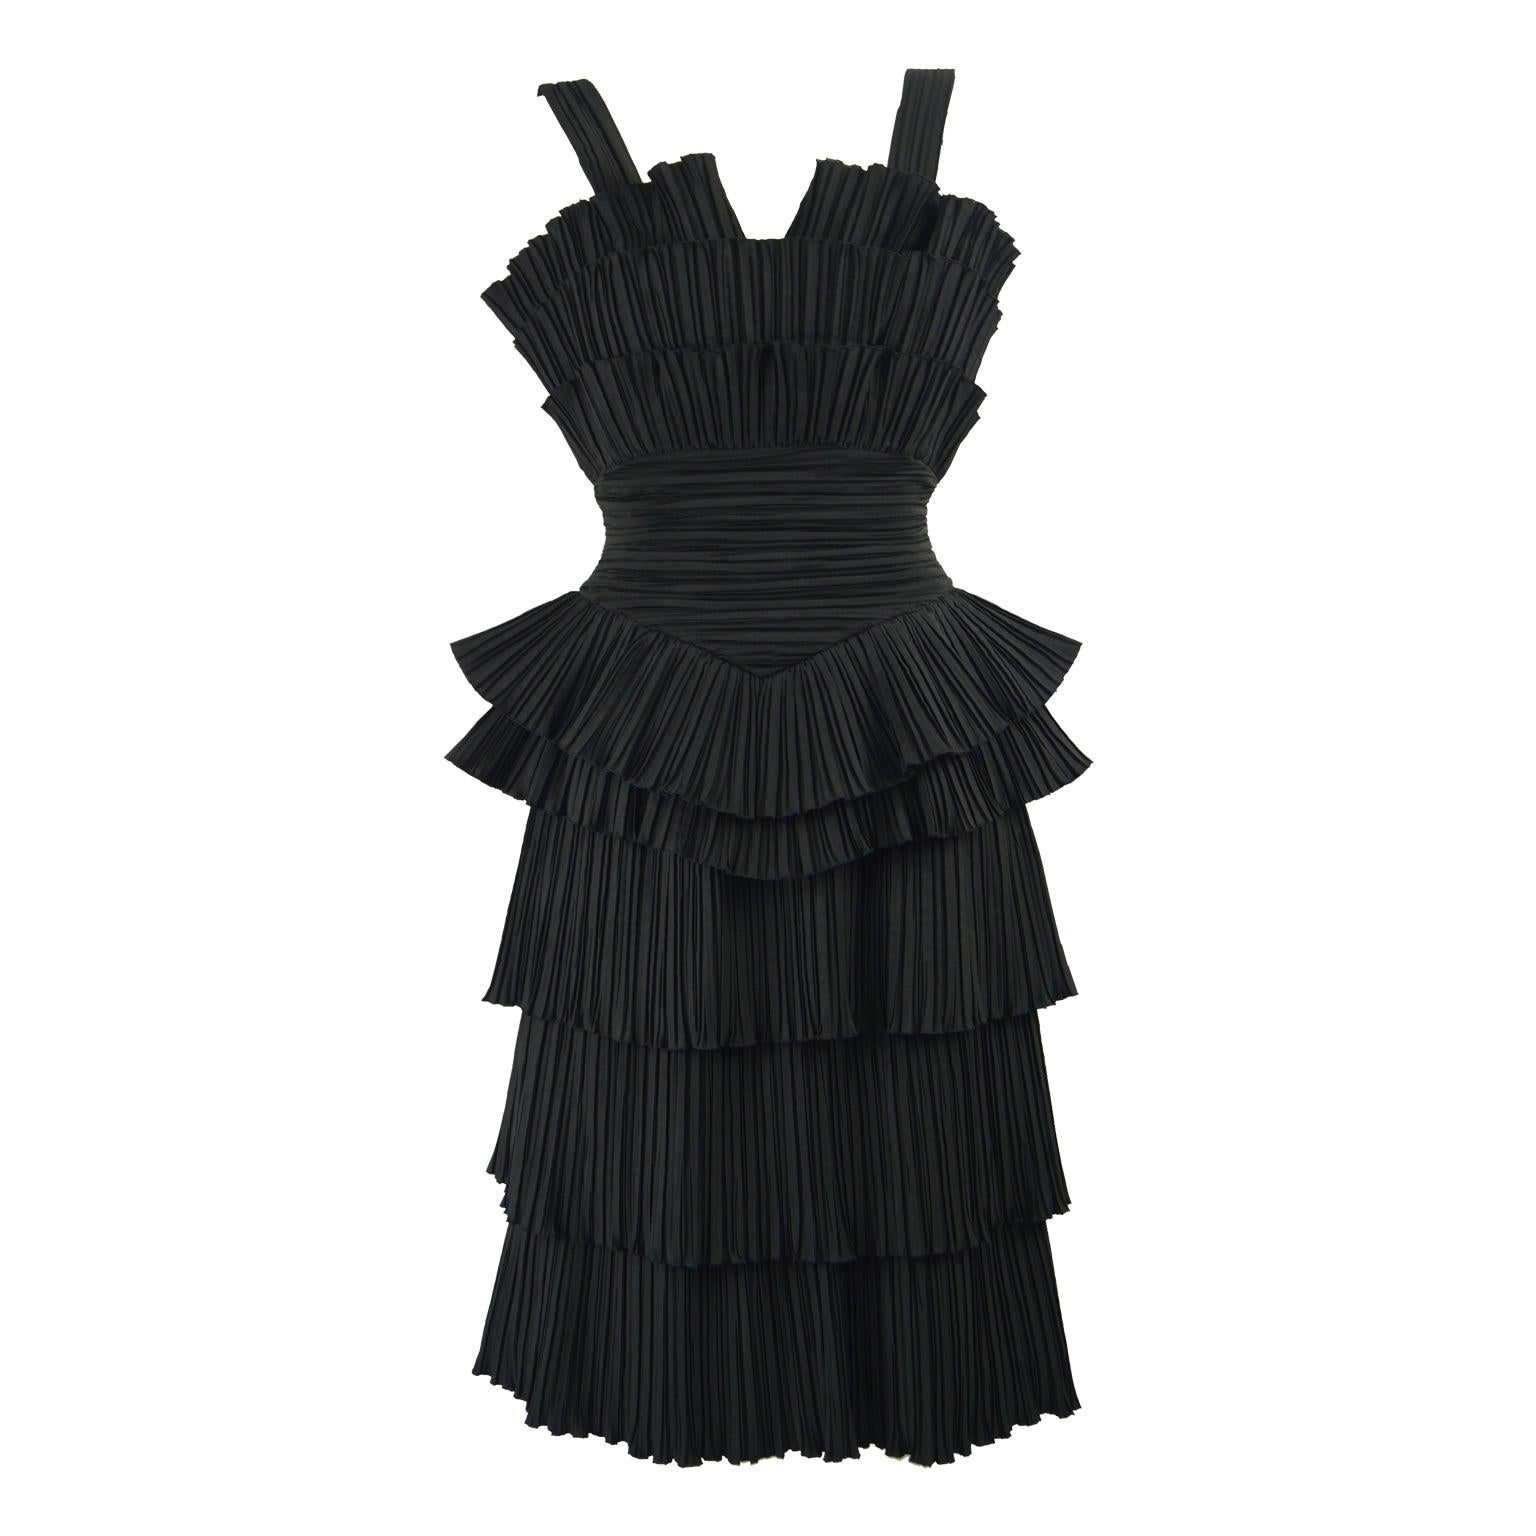 Louis Feraud Architectural Vintage Accordion Pleated Tiered Party Dress, 1980s